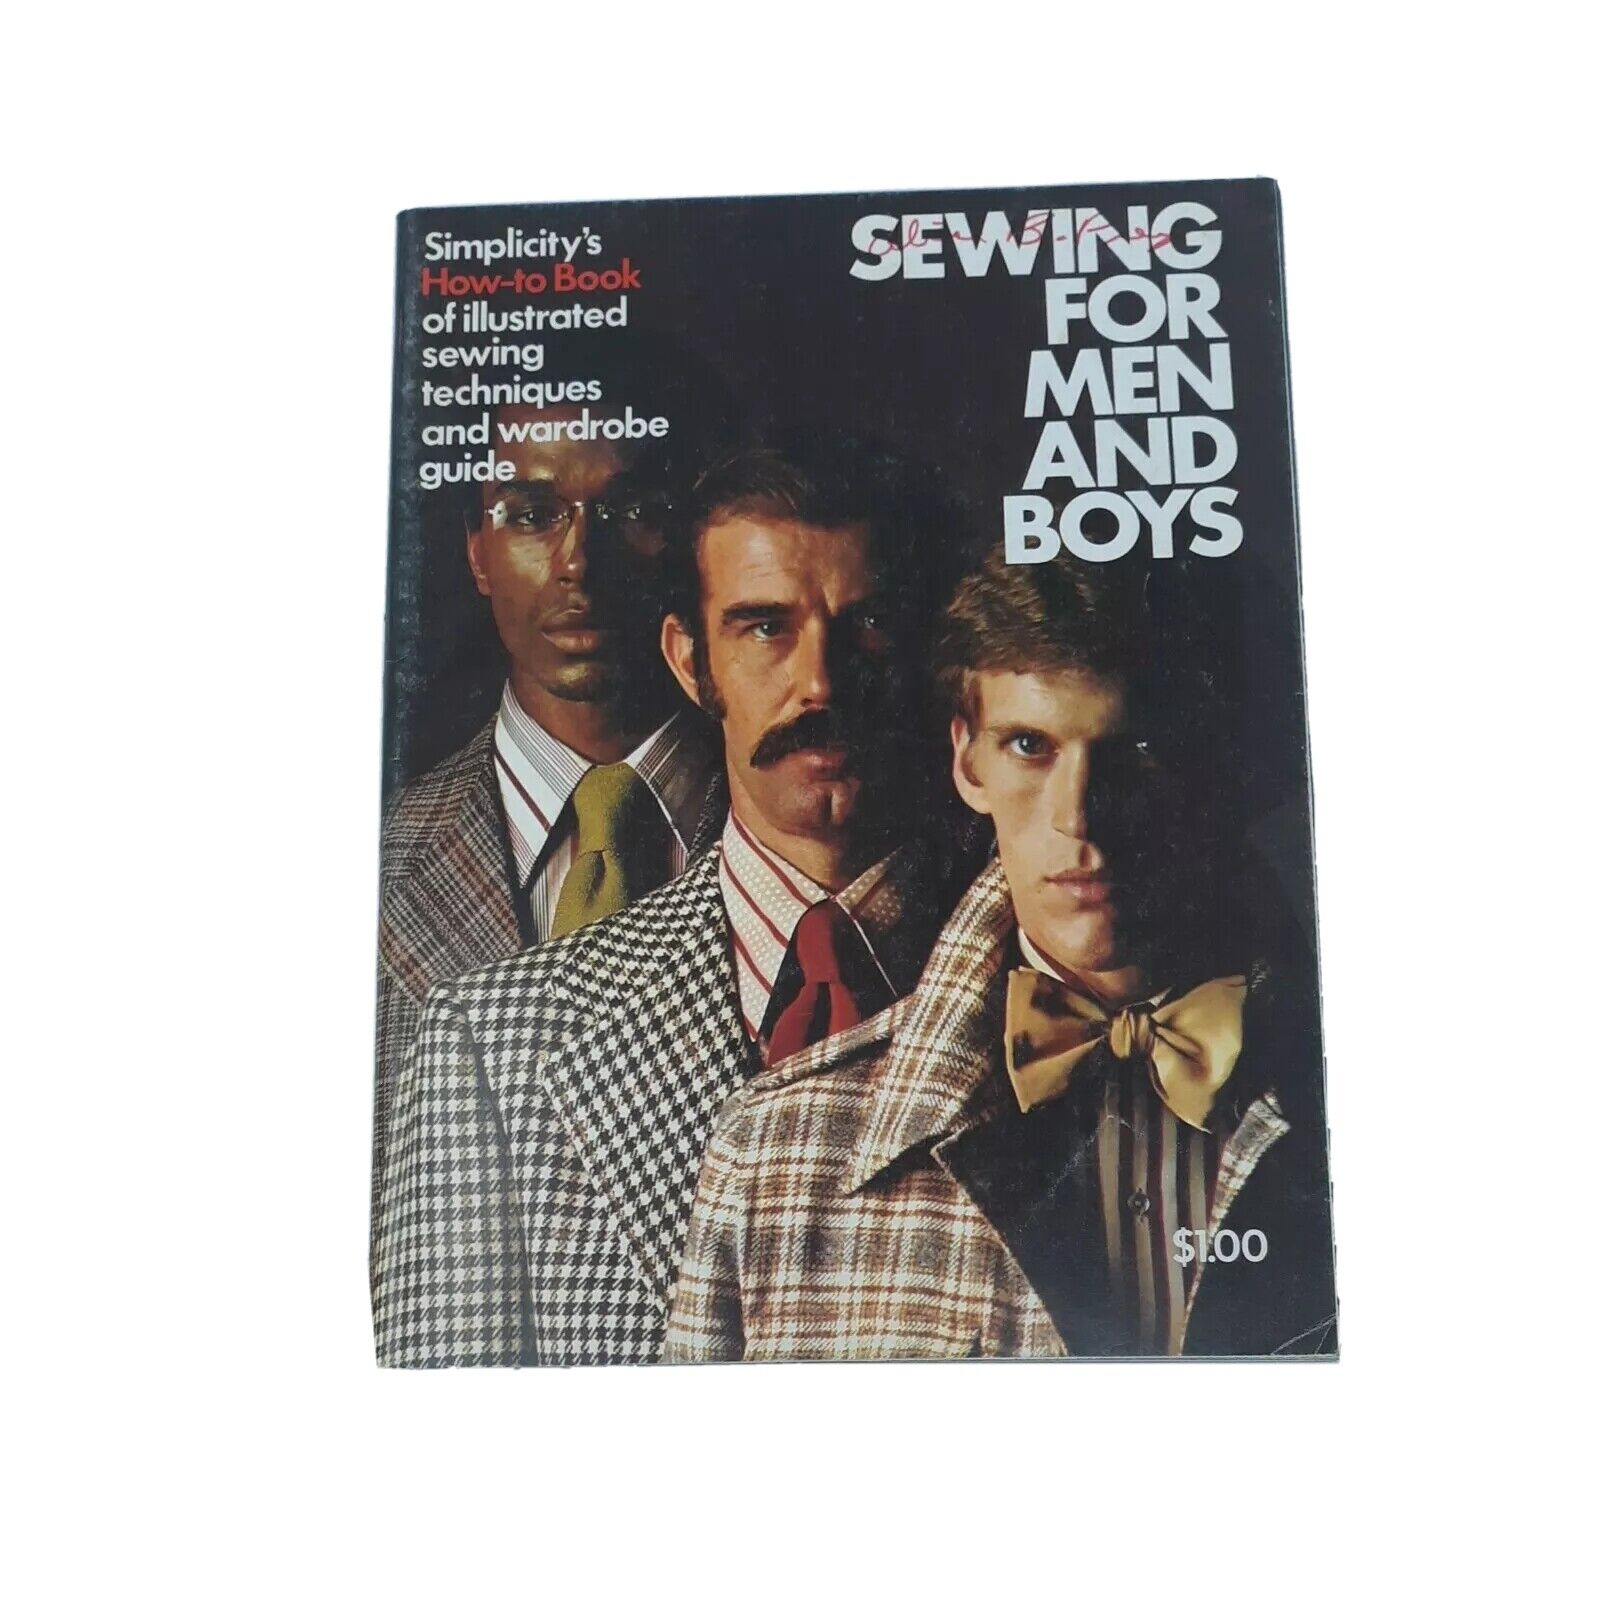 Vintage Simplicity's Sewing For Men and Boys 1973 (Paperback) Booklet